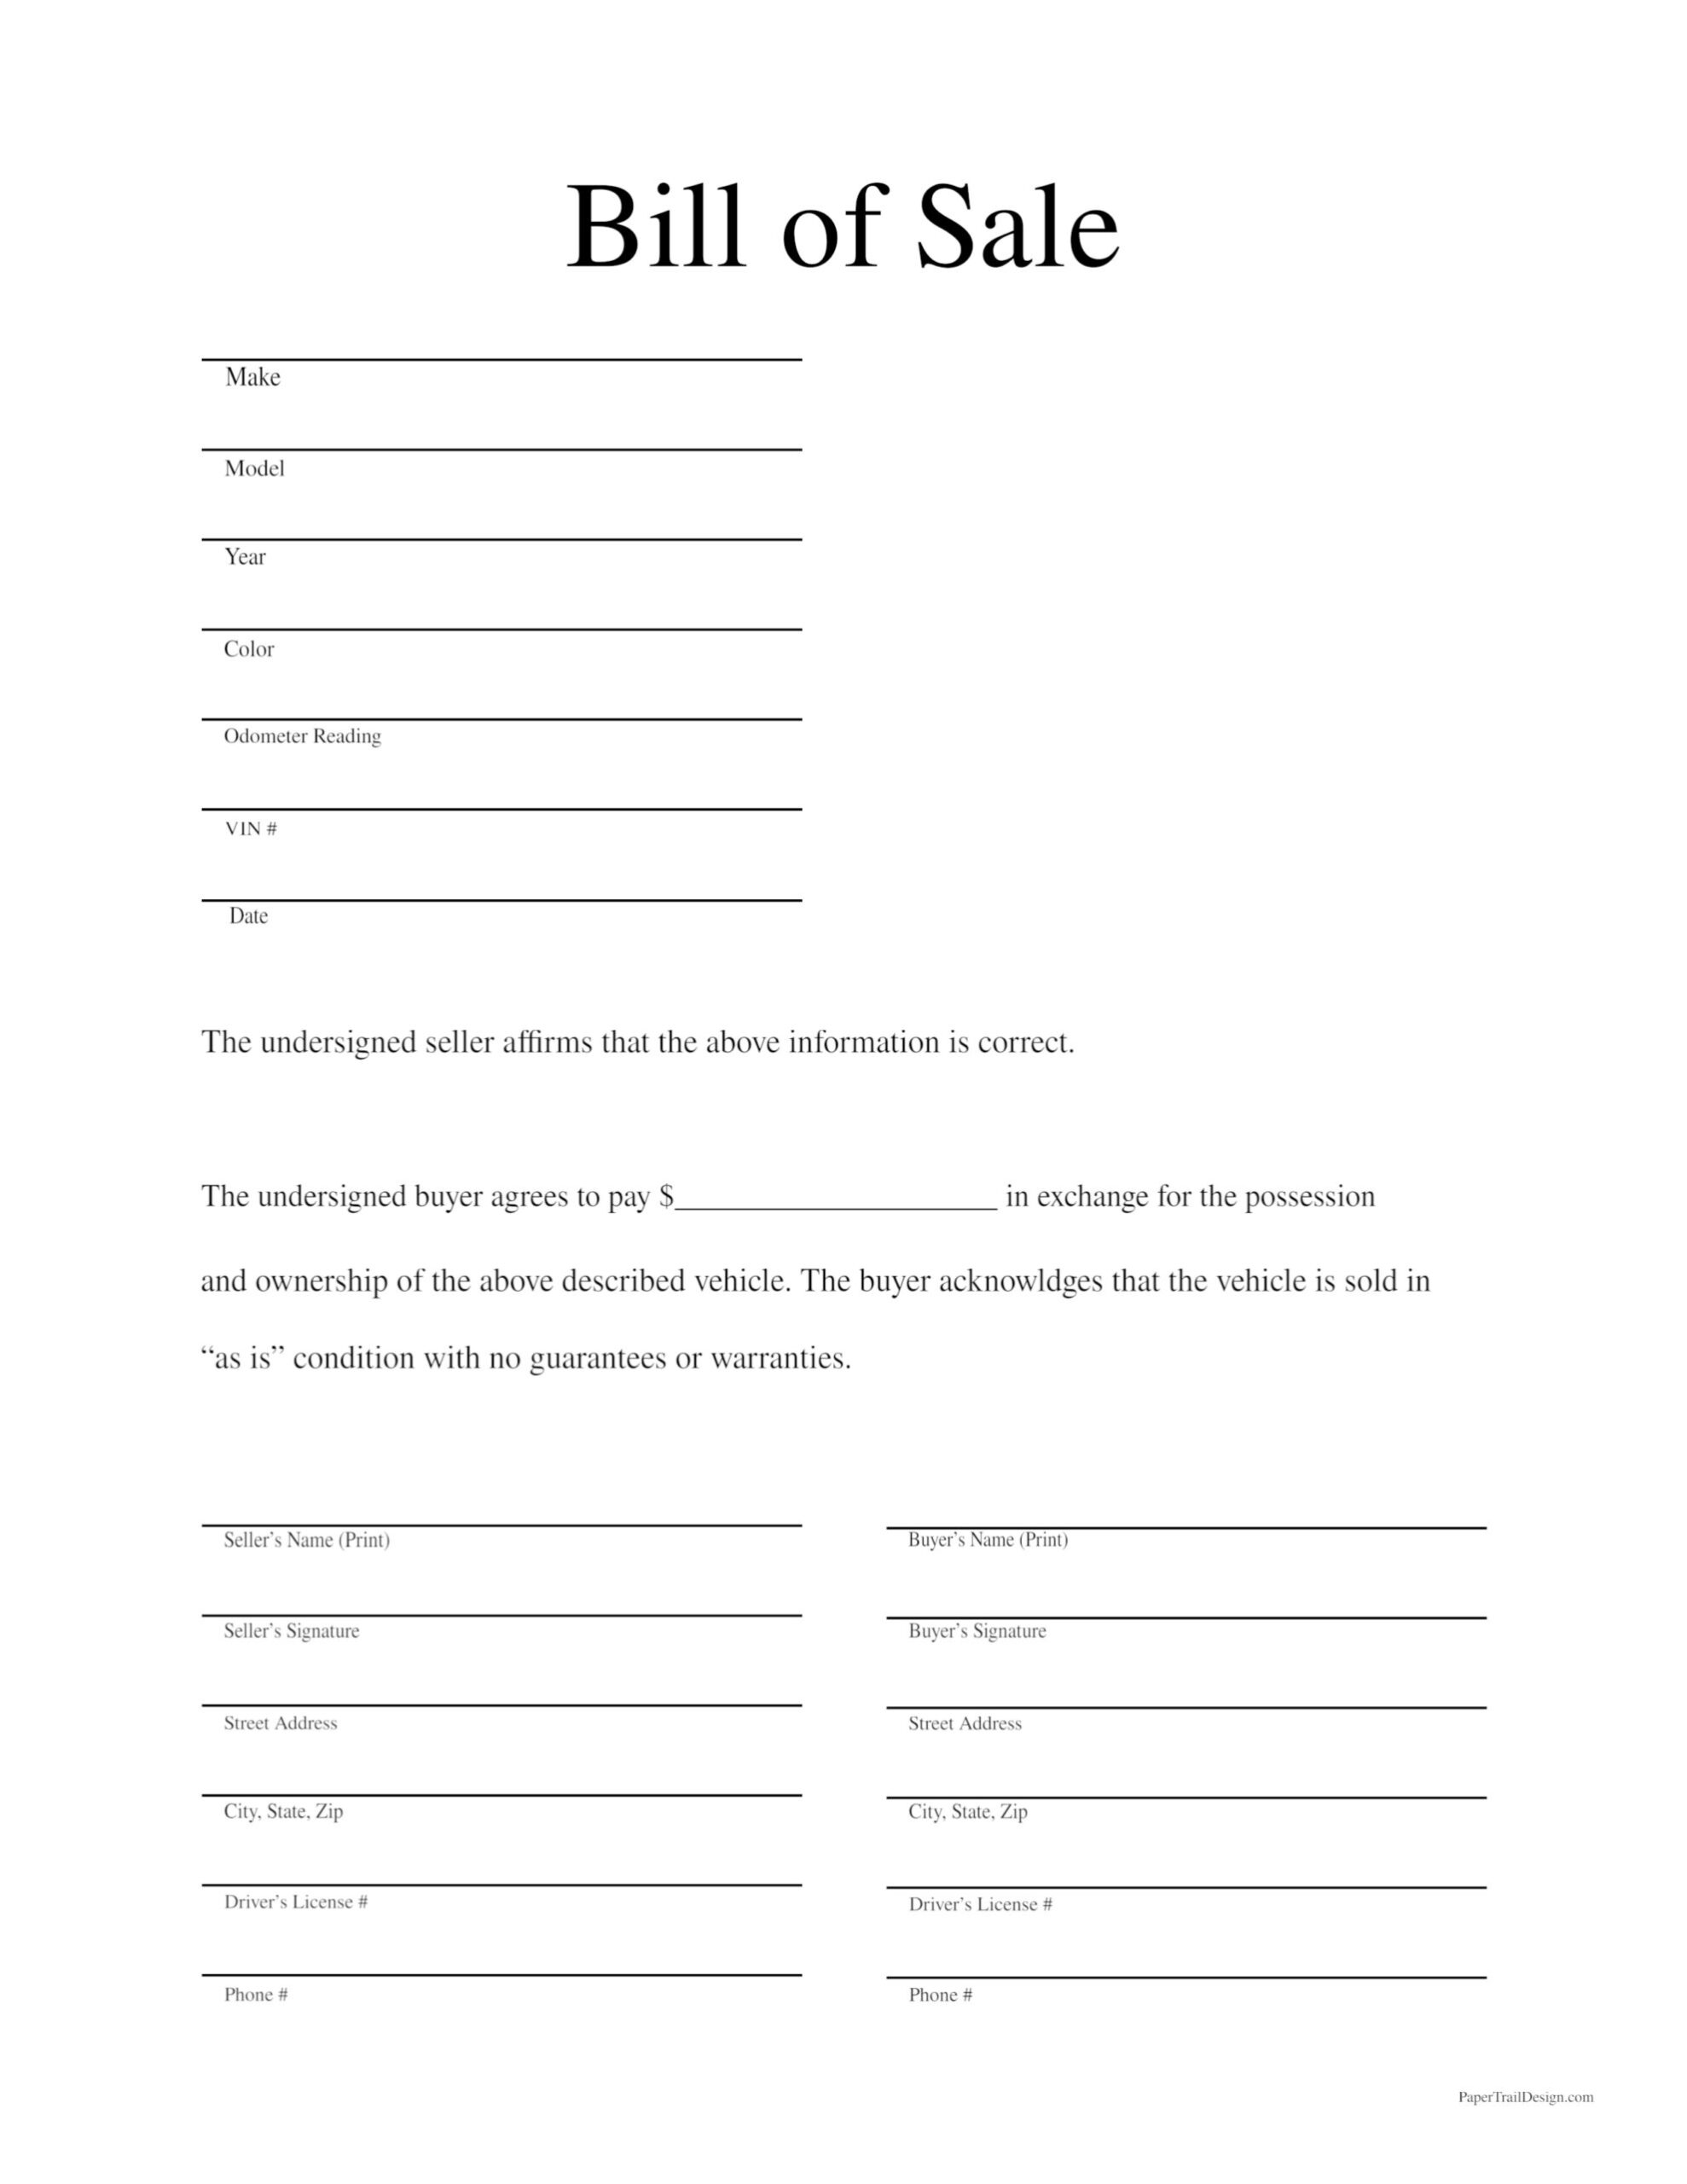 Free Printable Bill Of Sale Template - Paper Trail Design within Free Printable Generic Bill Of Sale